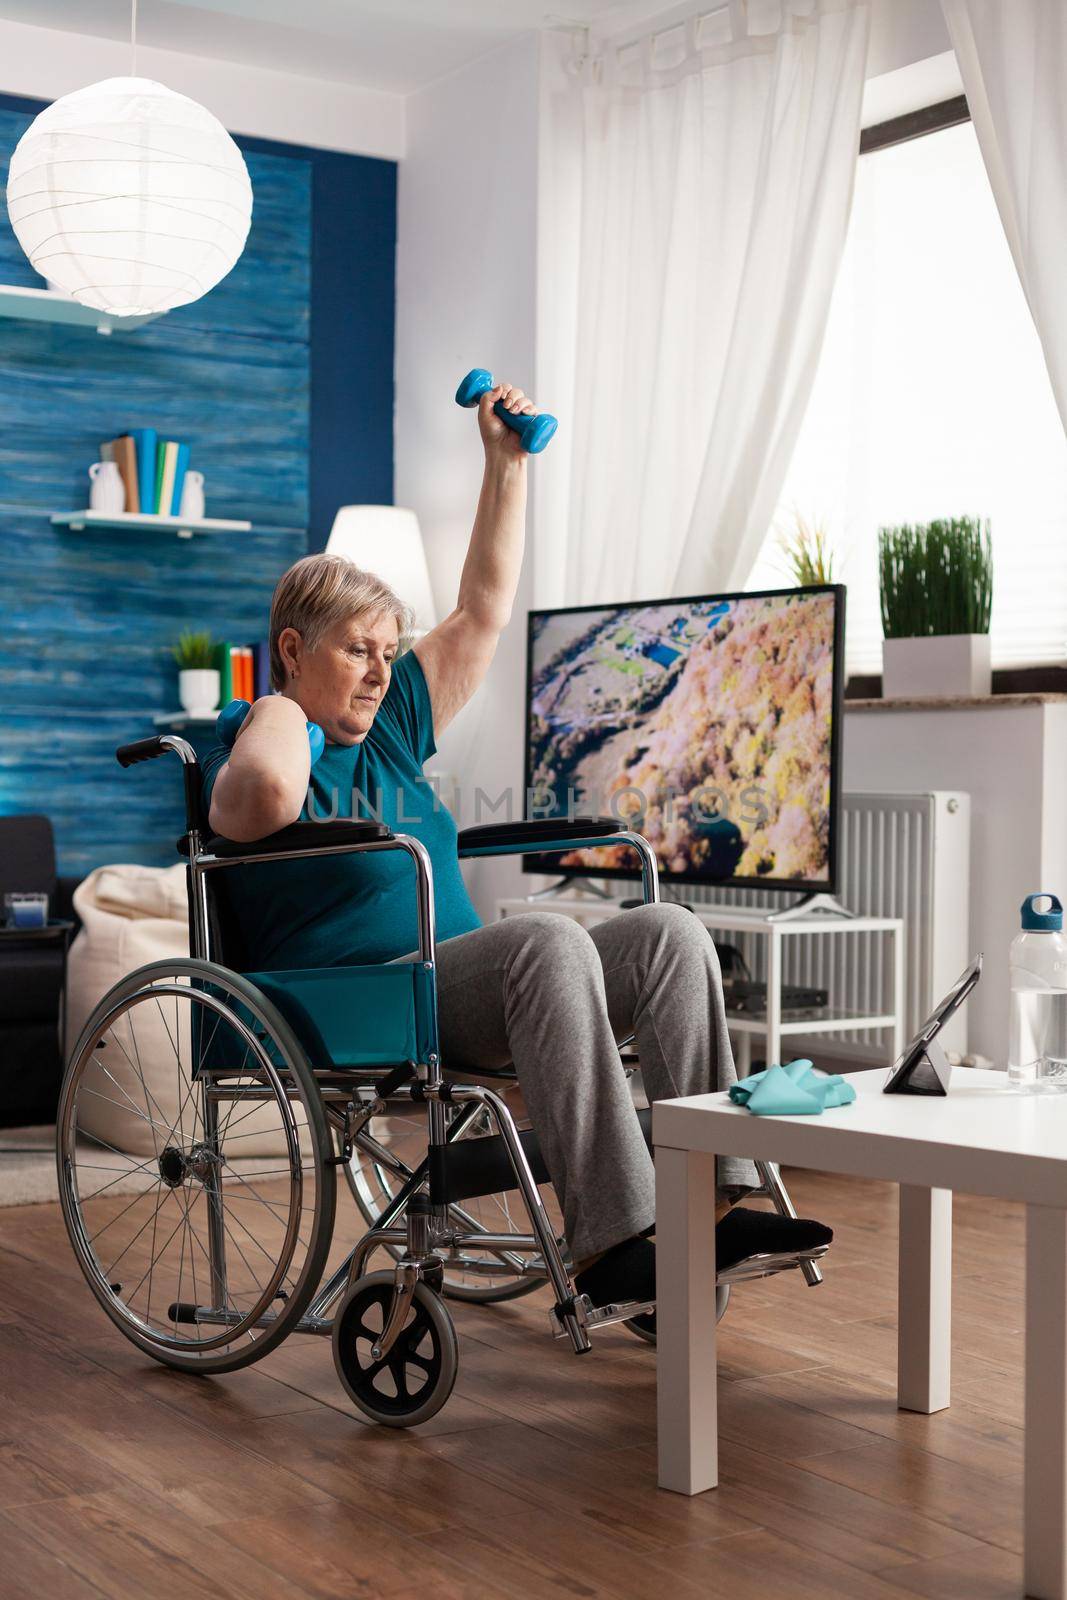 Invalid senior woman in wheelchair watching gym body exercise on tablet in living room exercising arms muscle using workout dumbbells. Pensioner recovery after paralysis training muscles resistance